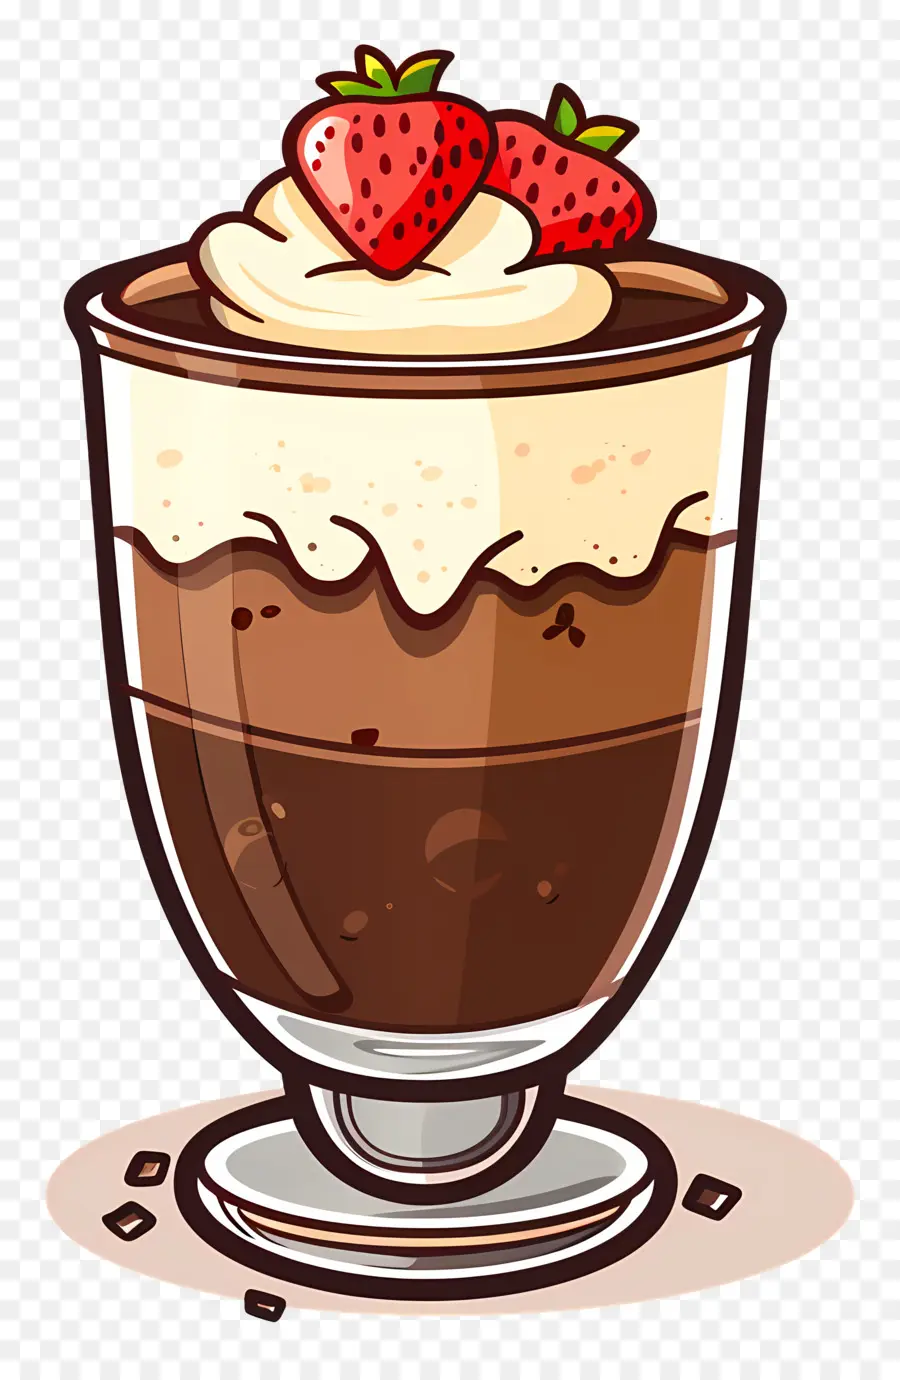 Chocolate Perfeito，Mousse De Chocolate PNG